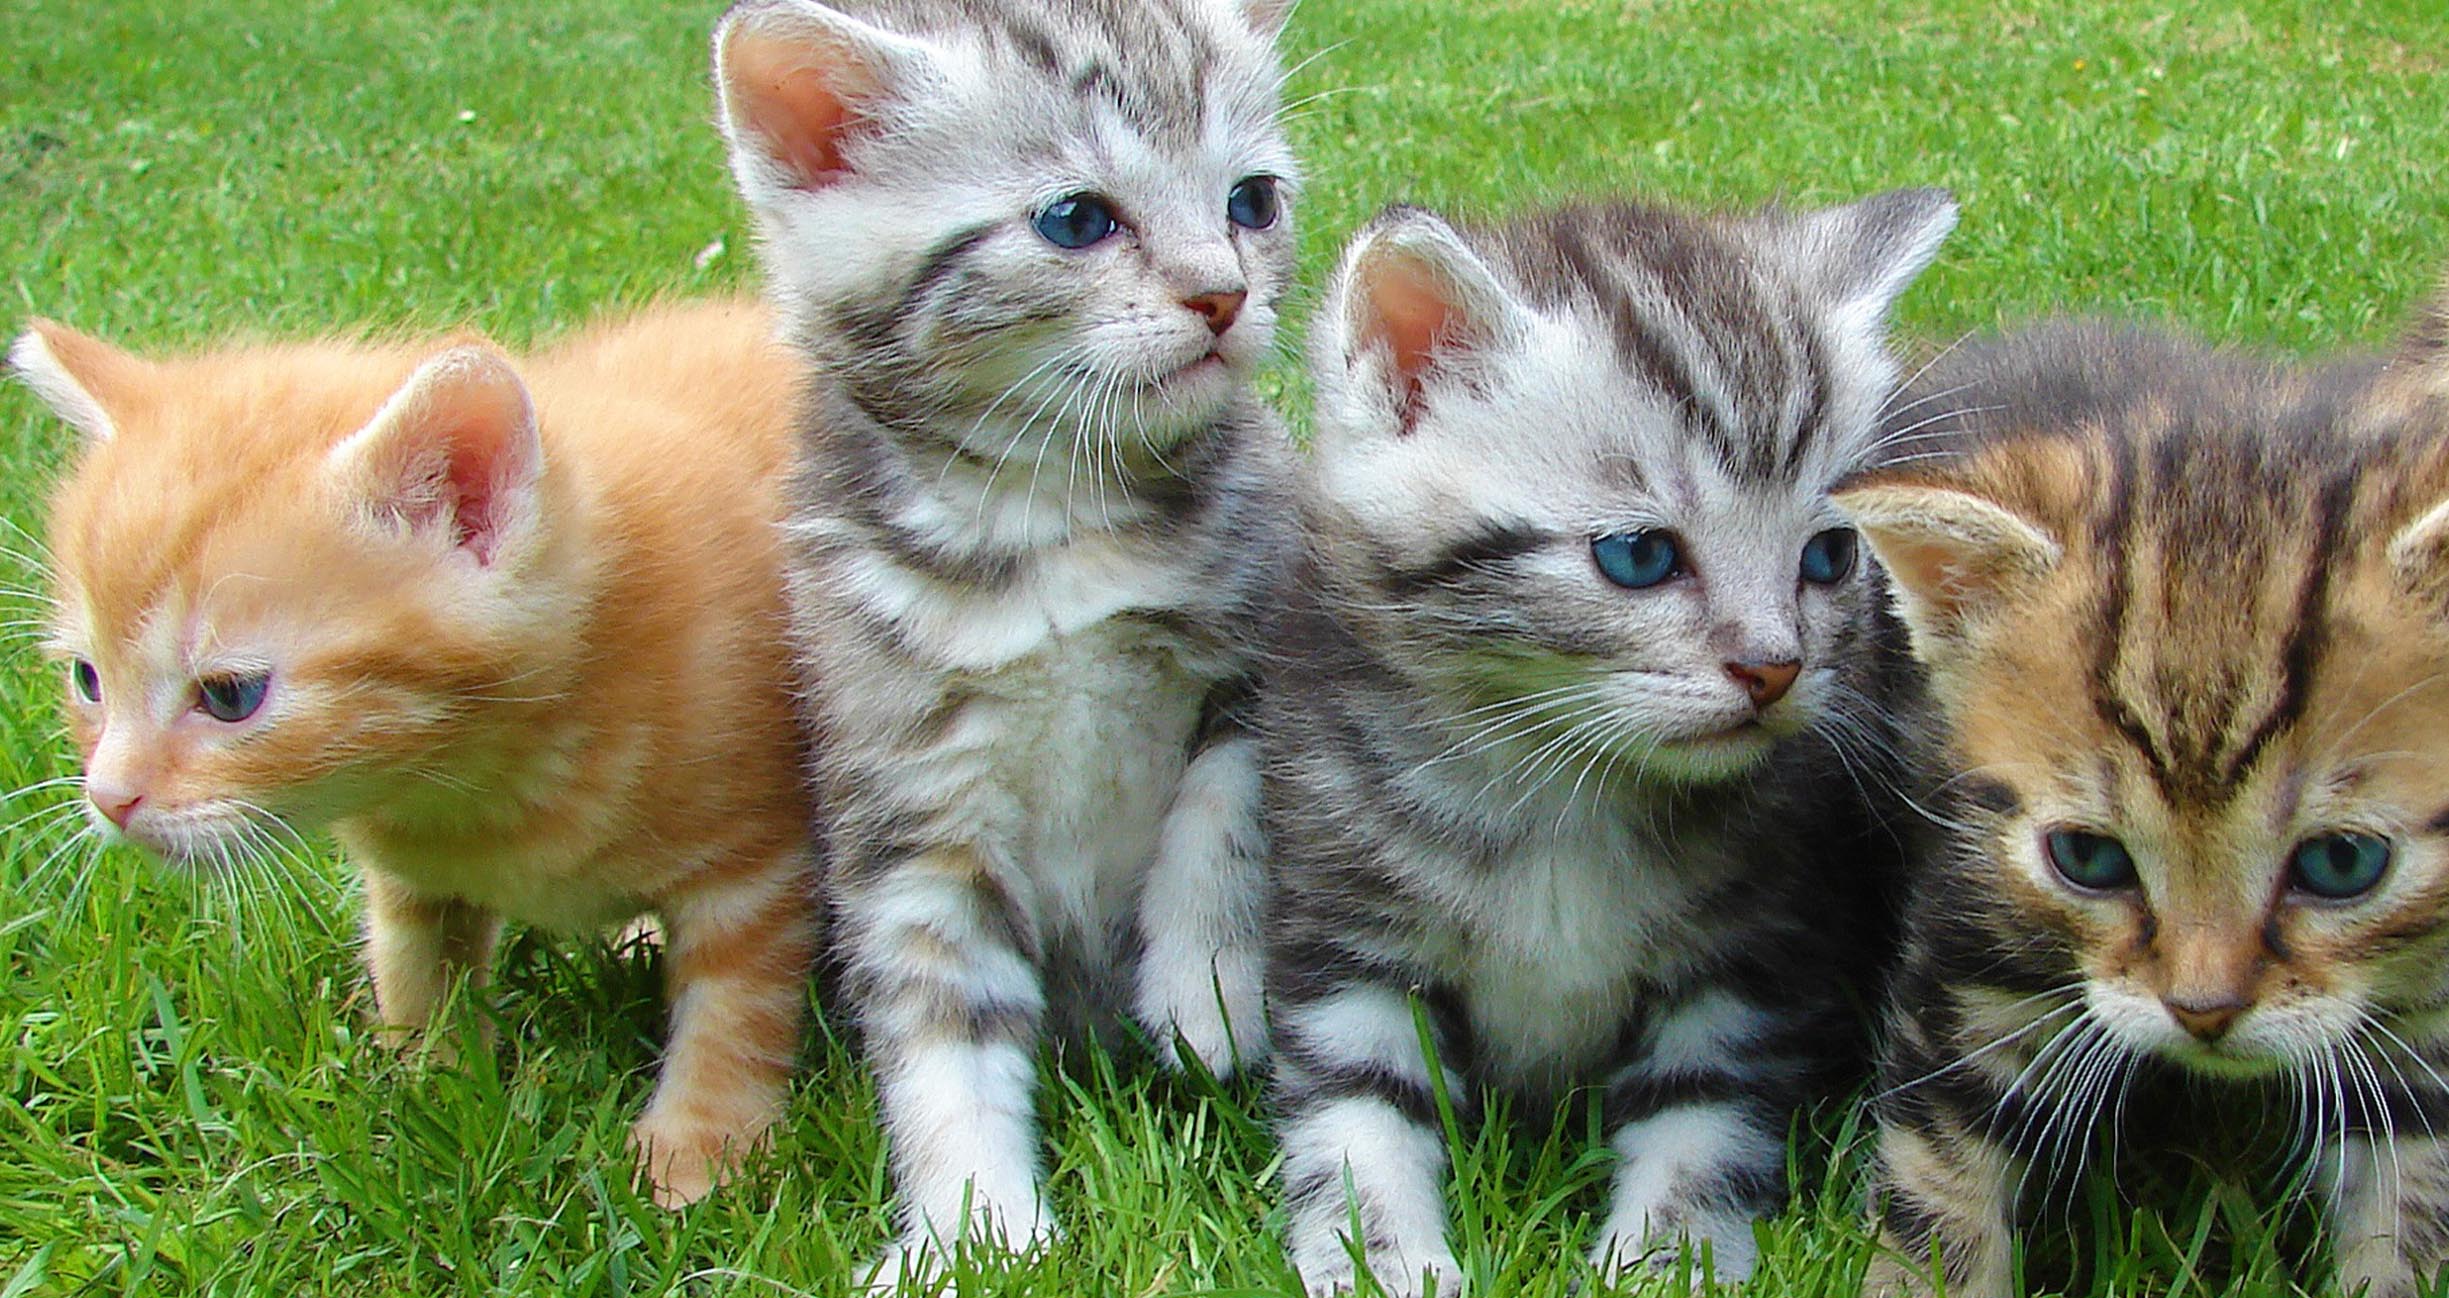 Four kittens huddle together exploring a green lawn